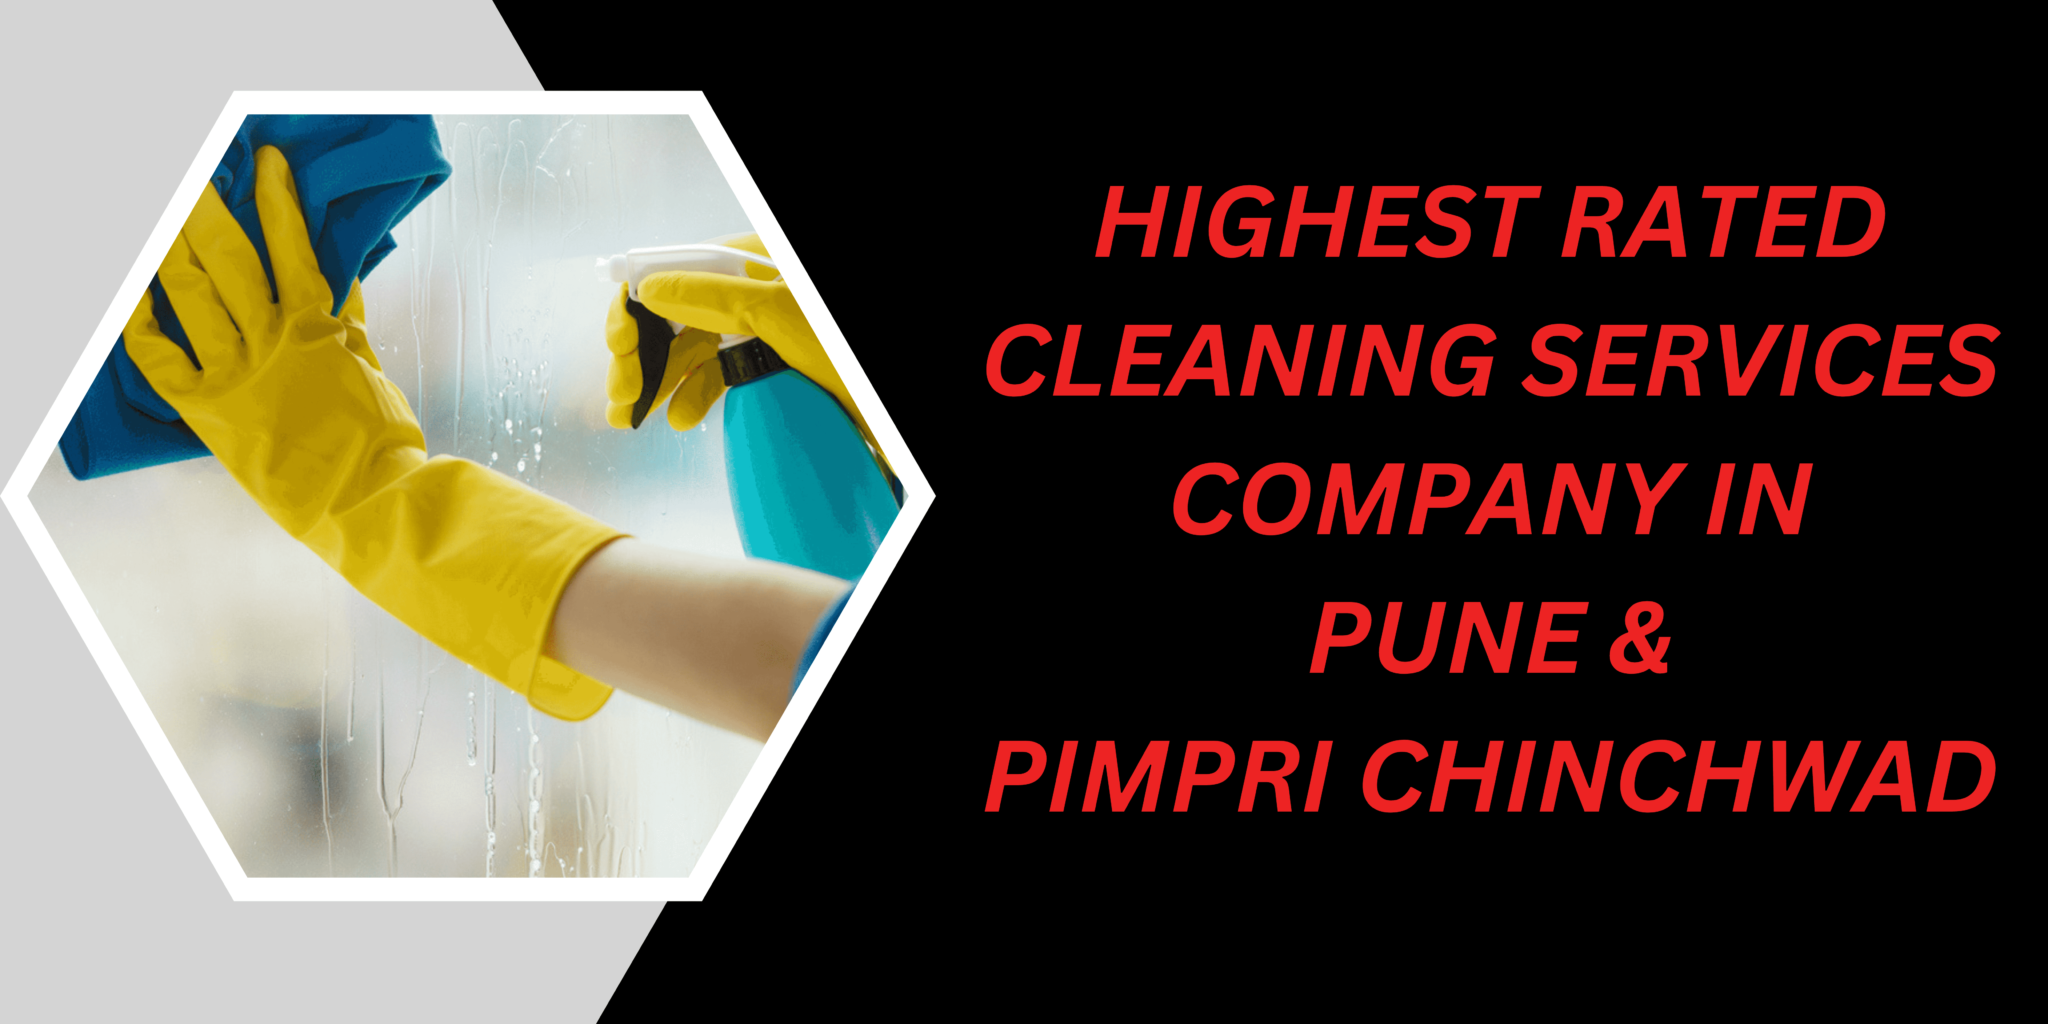 Highest Rated Cleaning Services Company In Pune & PCMC Dirt Blaster Cleaning Services